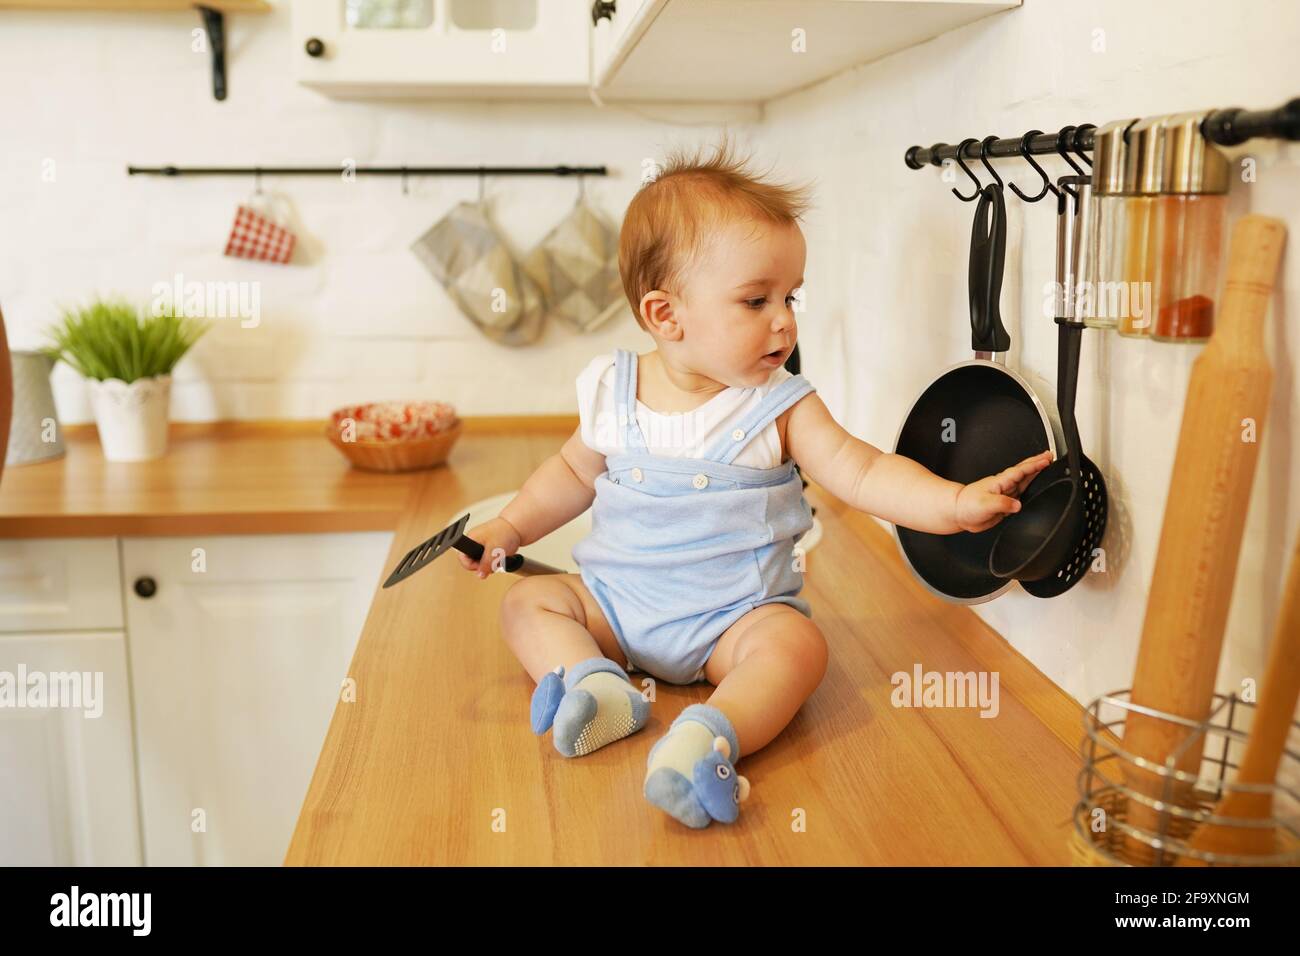 https://c8.alamy.com/comp/2F9XNGM/cute-child-baby-boy-1-years-old-sitting-on-the-table-with-big-spoon-in-the-kitchen-room-2F9XNGM.jpg